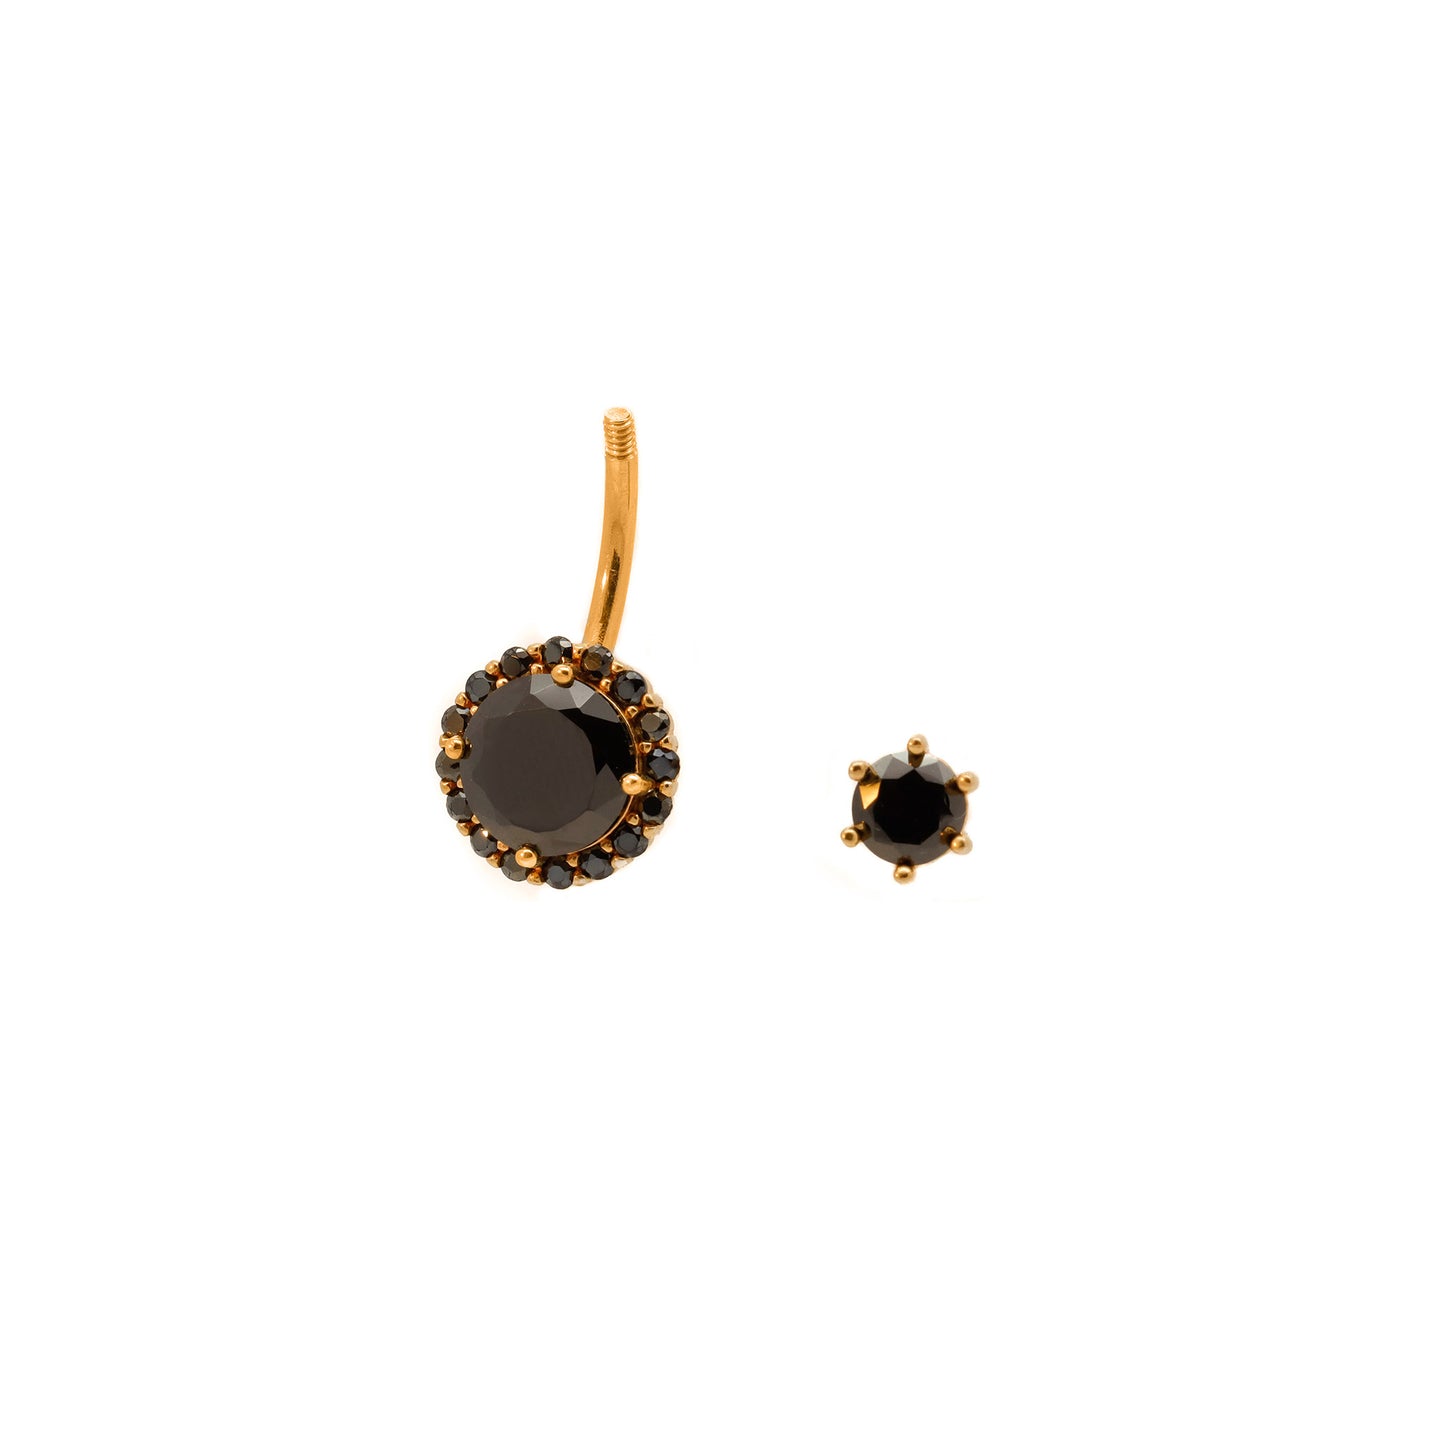 Vermeil | 925 Silver 24k Gold Coated Black Zirconia Halo Belly Ring | 6mm 1/4" 8mm 5/16" 10mm 3/8" - Sturdy South